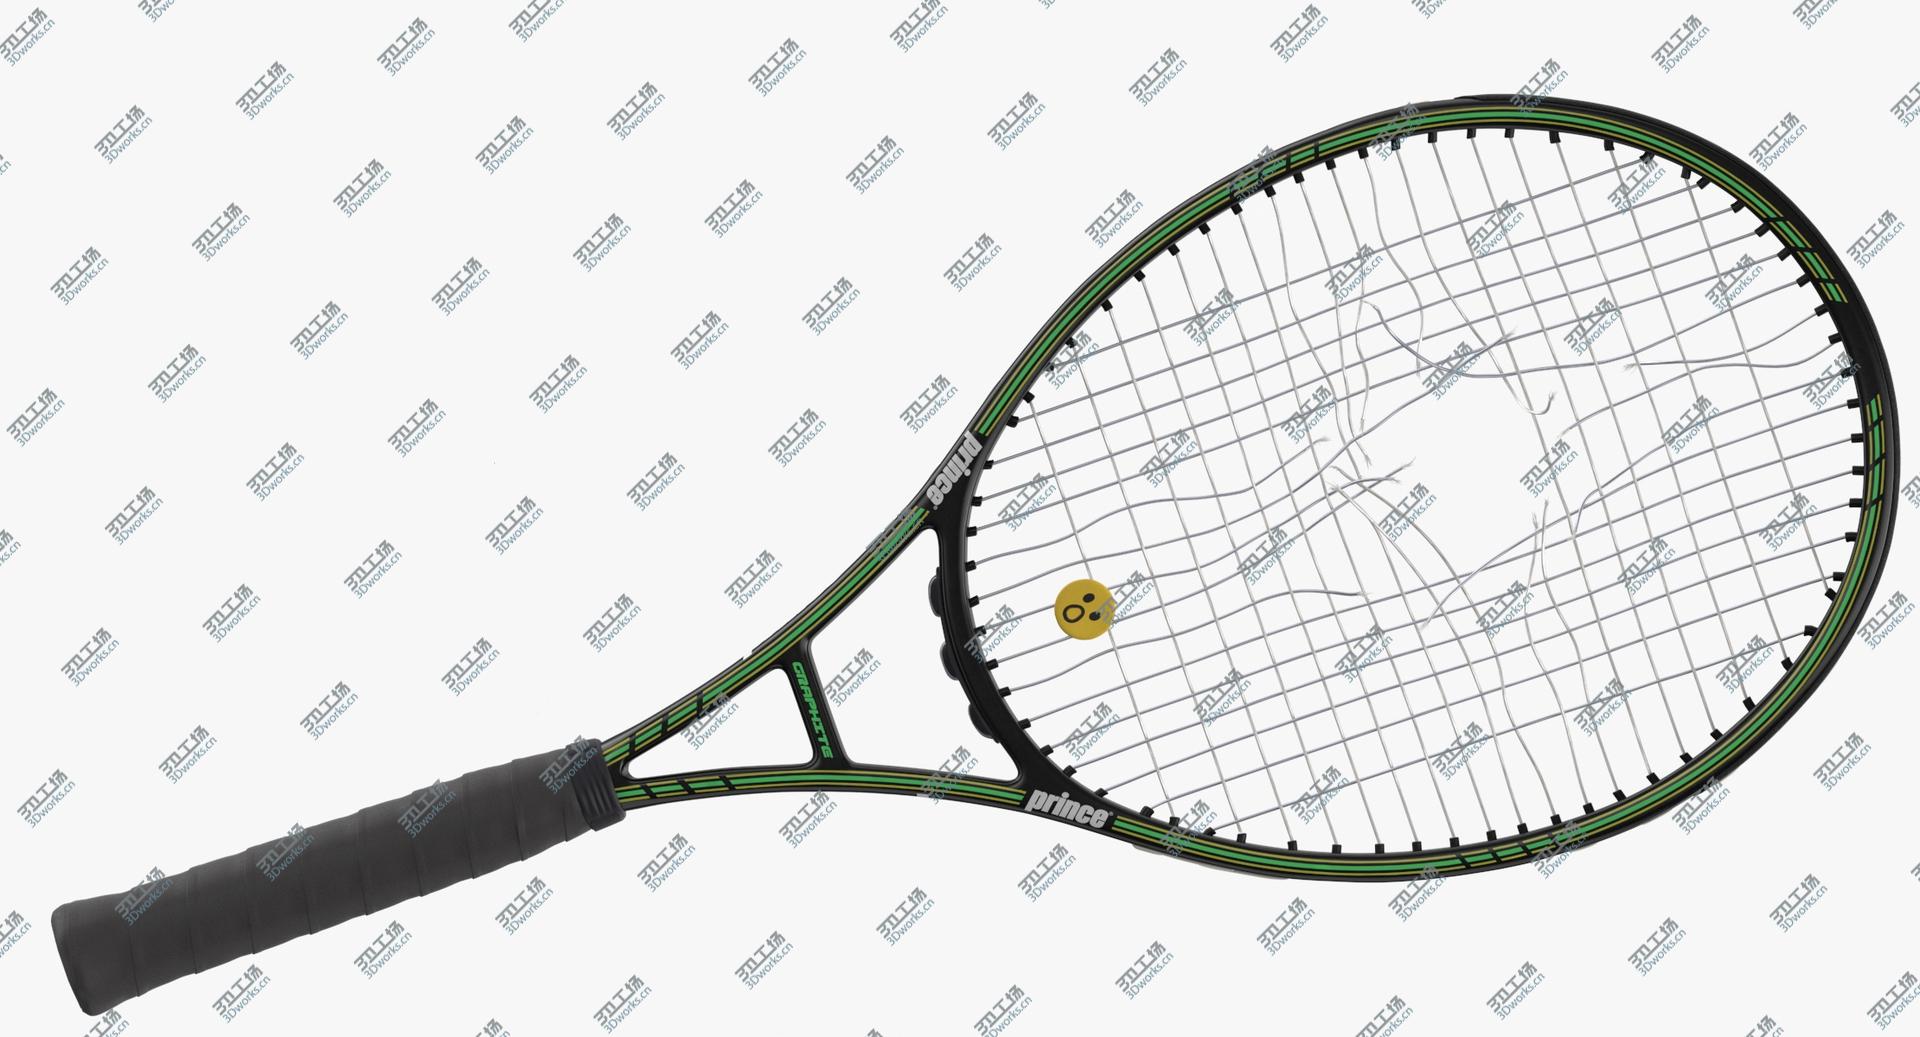 images/goods_img/2021040231/Tennis Racket With A Hole model/2.jpg